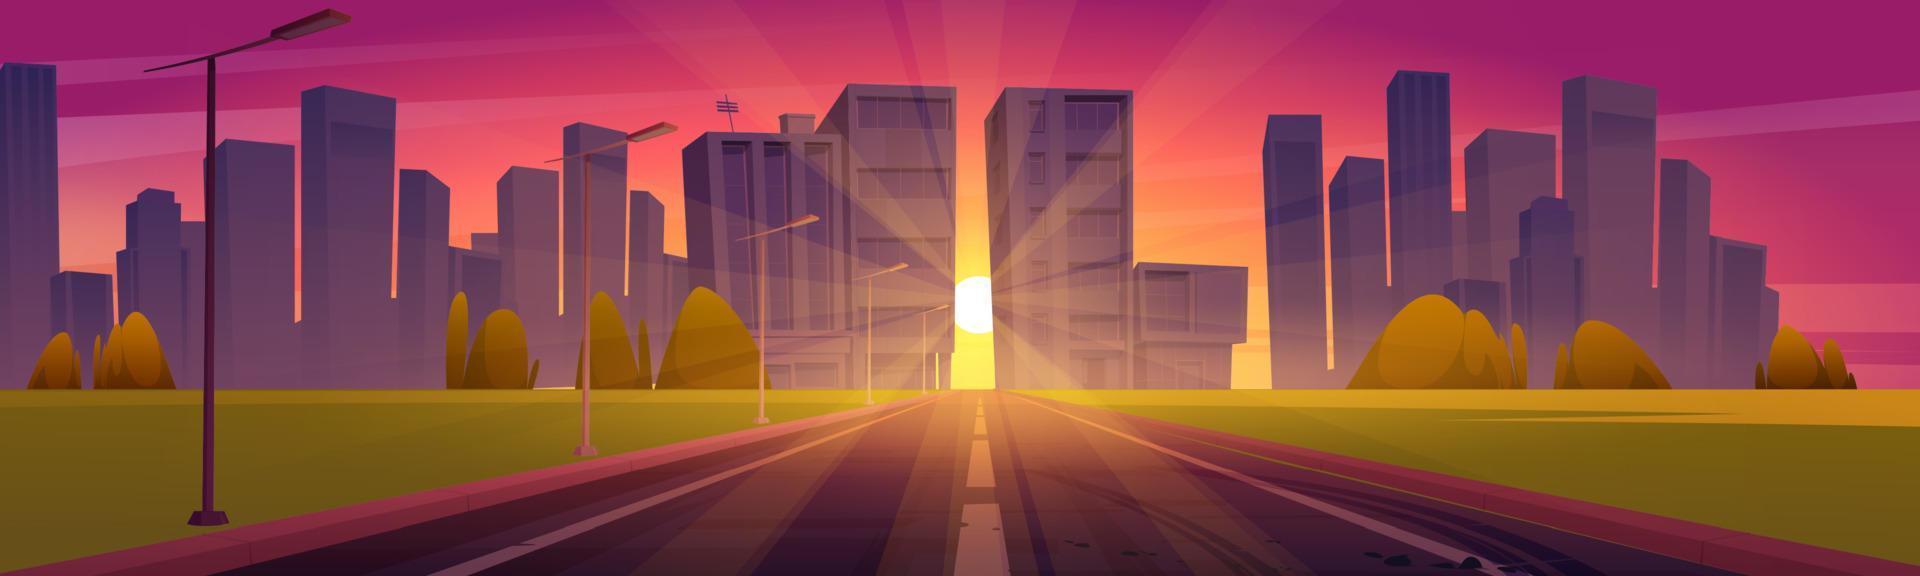 Road to city with buildings on skyline at sunset vector